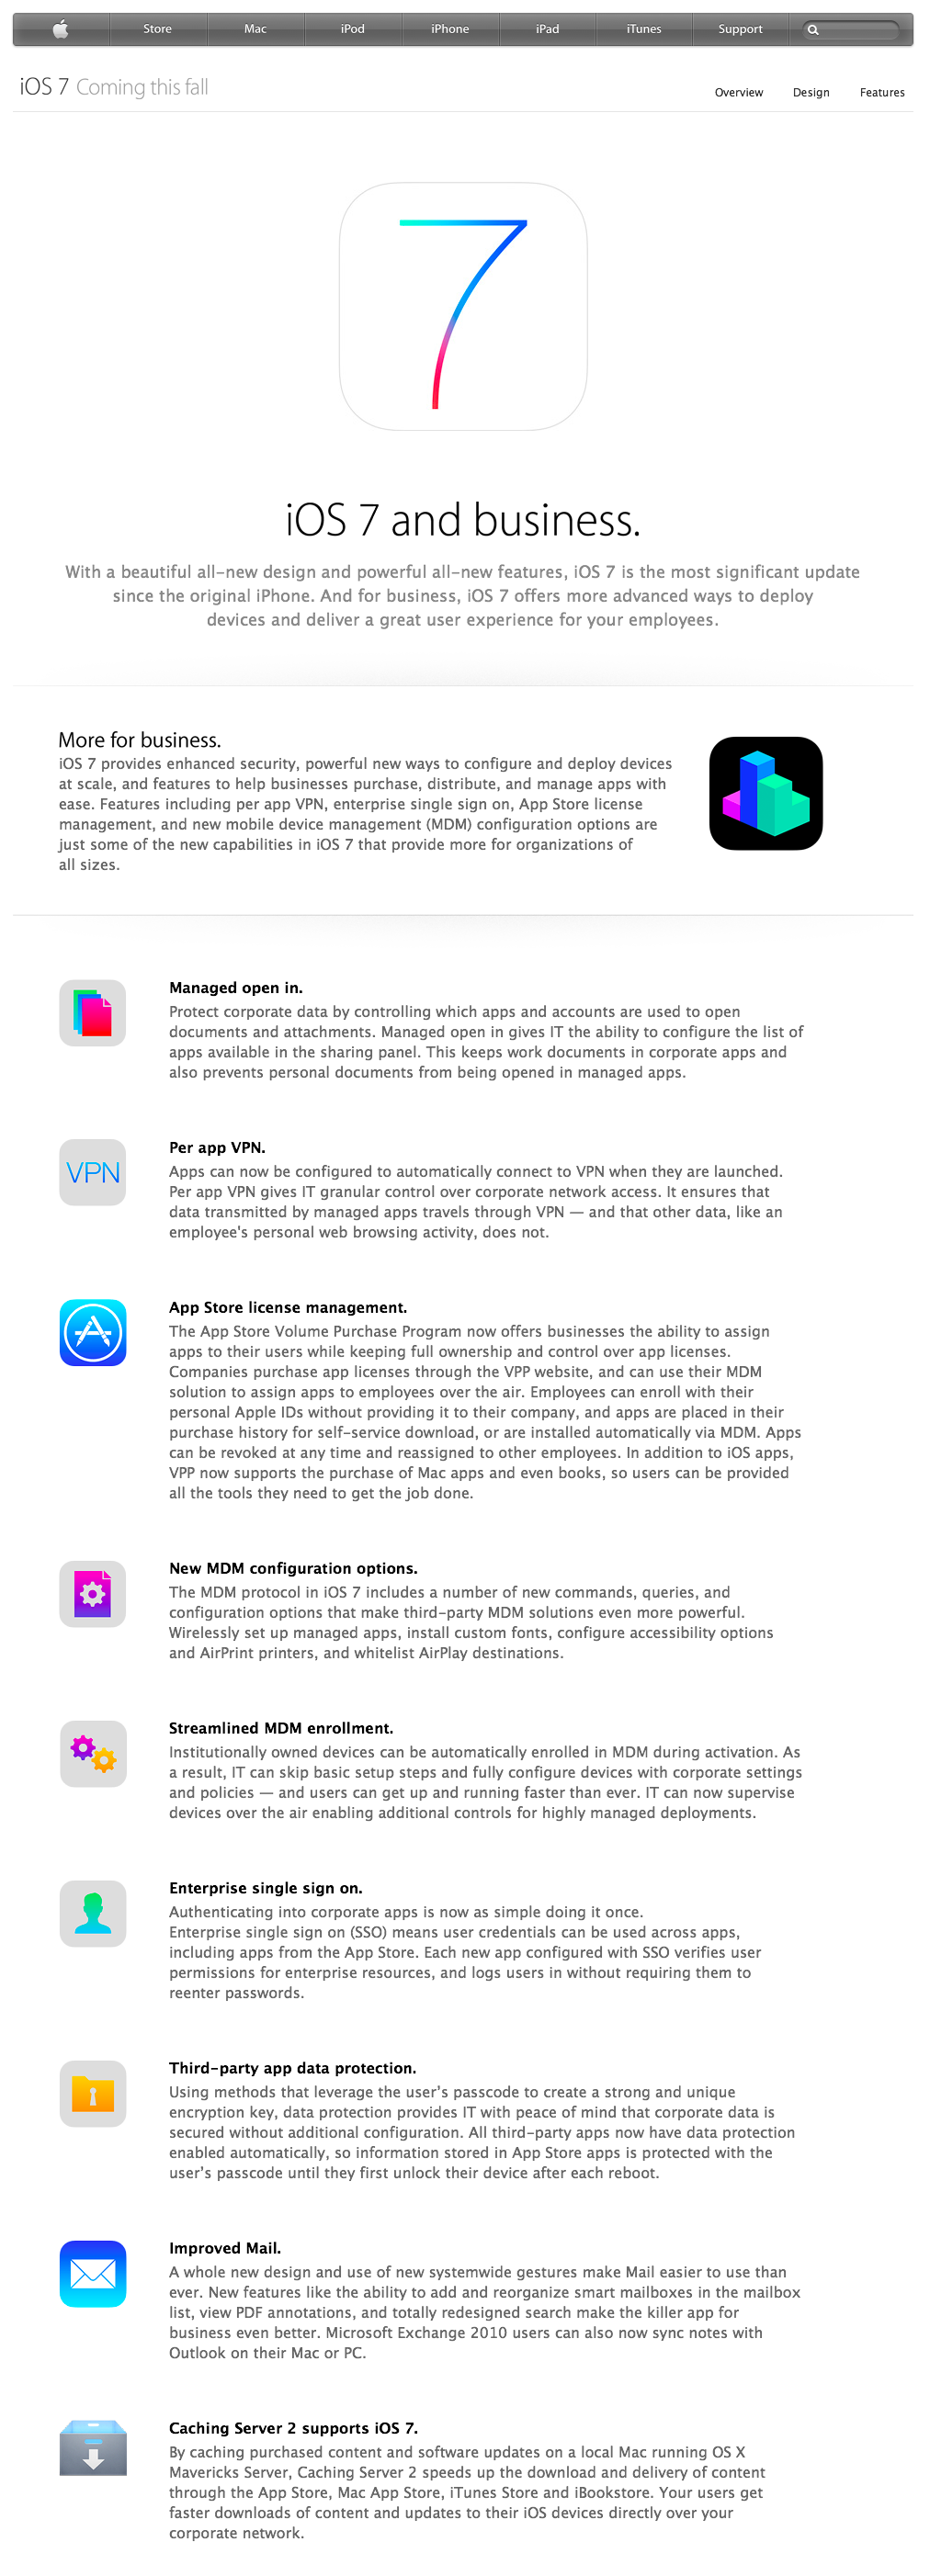 Apple Highlights iOS 7 Features for Business